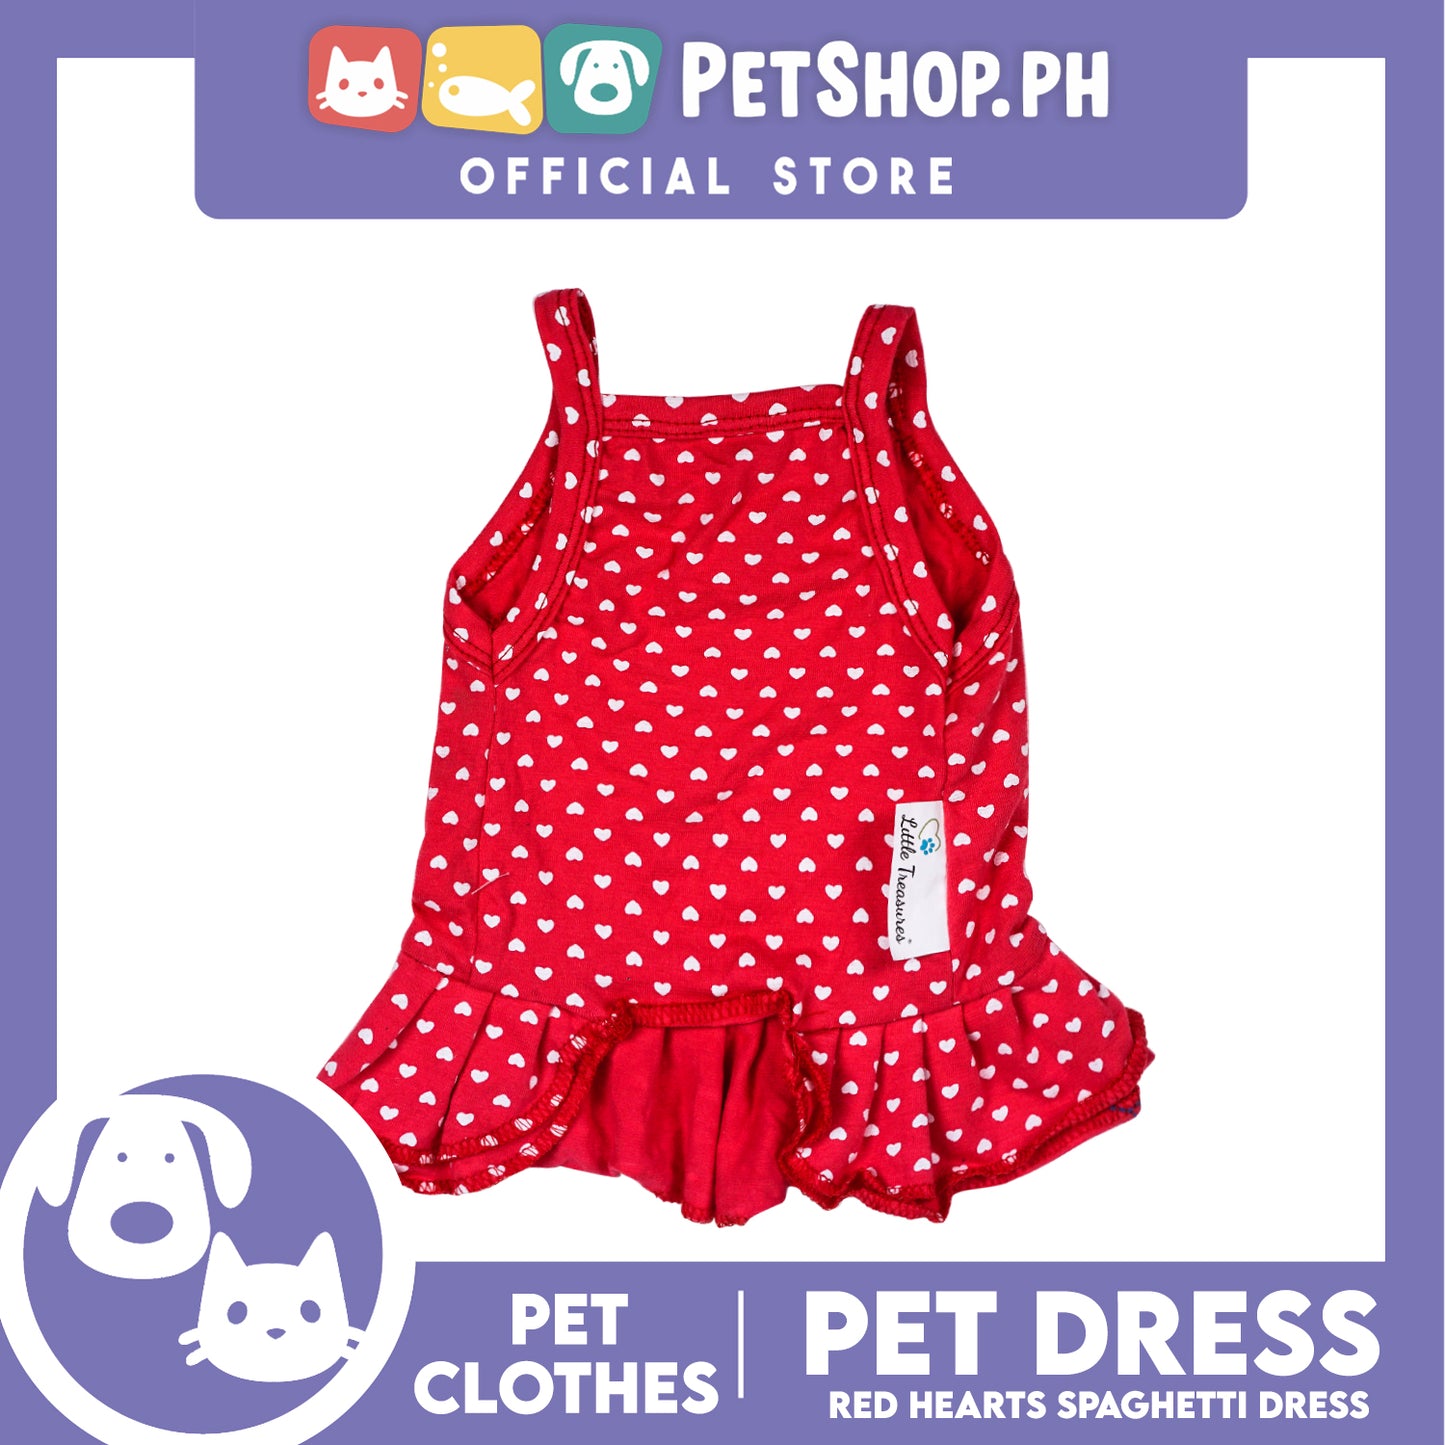 Pet Dress Red Spaghetti with Heart Design Pet Clothes (Small) Perfect Fit for Dogs and Cats